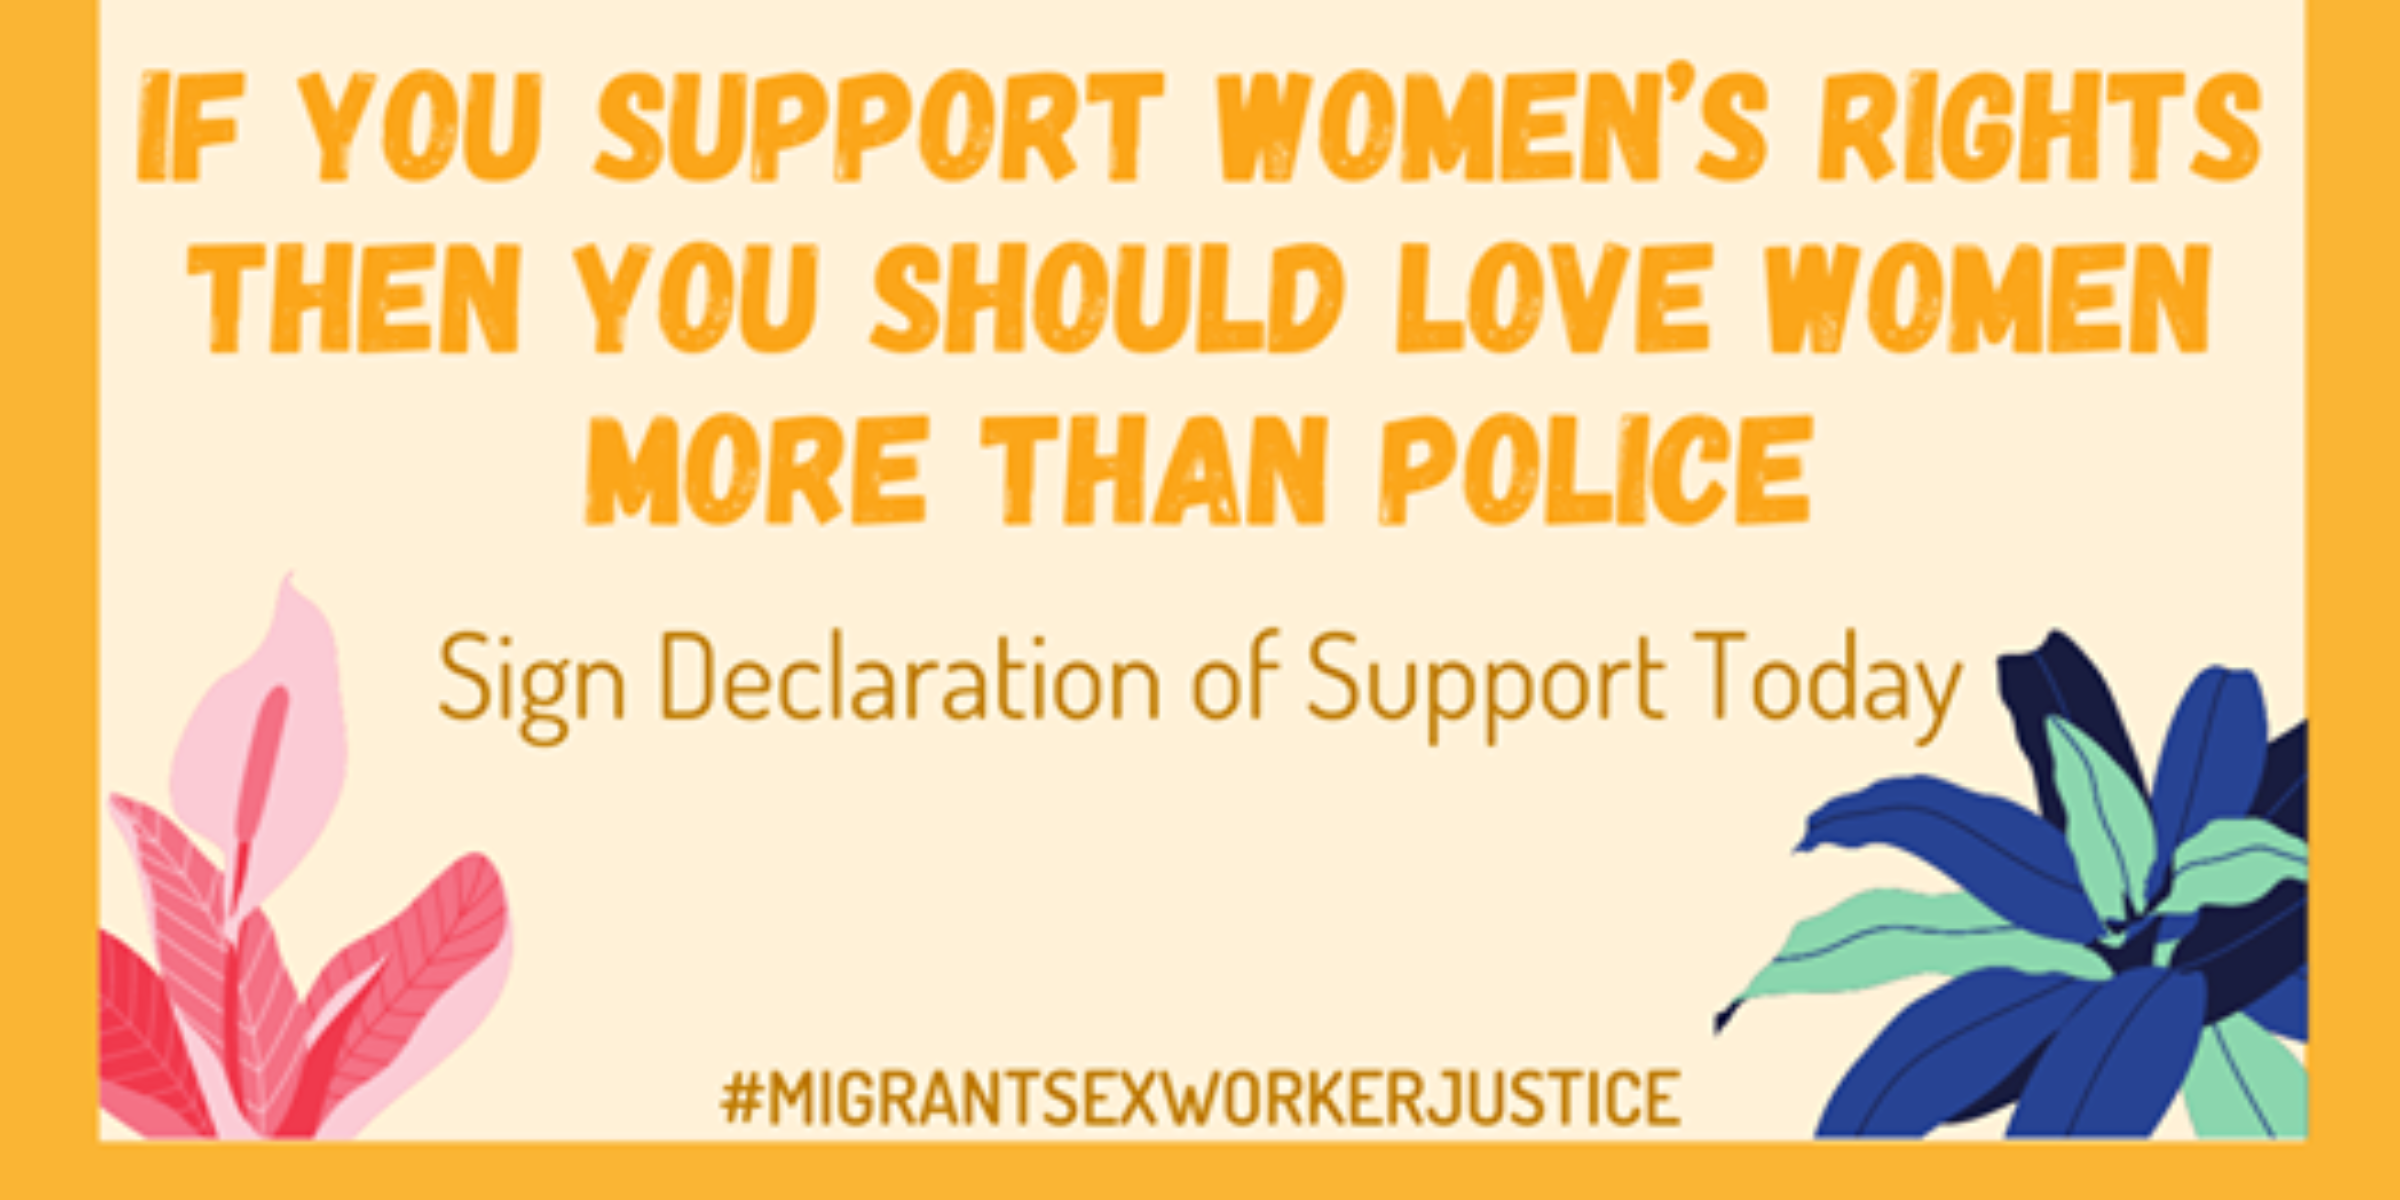 A yellow background features bold text that reads "If you support women's rights then you should love women more than police." Below, it says "Sign Declaration of Support Today." Decorative pink and blue plants adorn two corners. Hashtag #MigrantSexWorkerJustice.